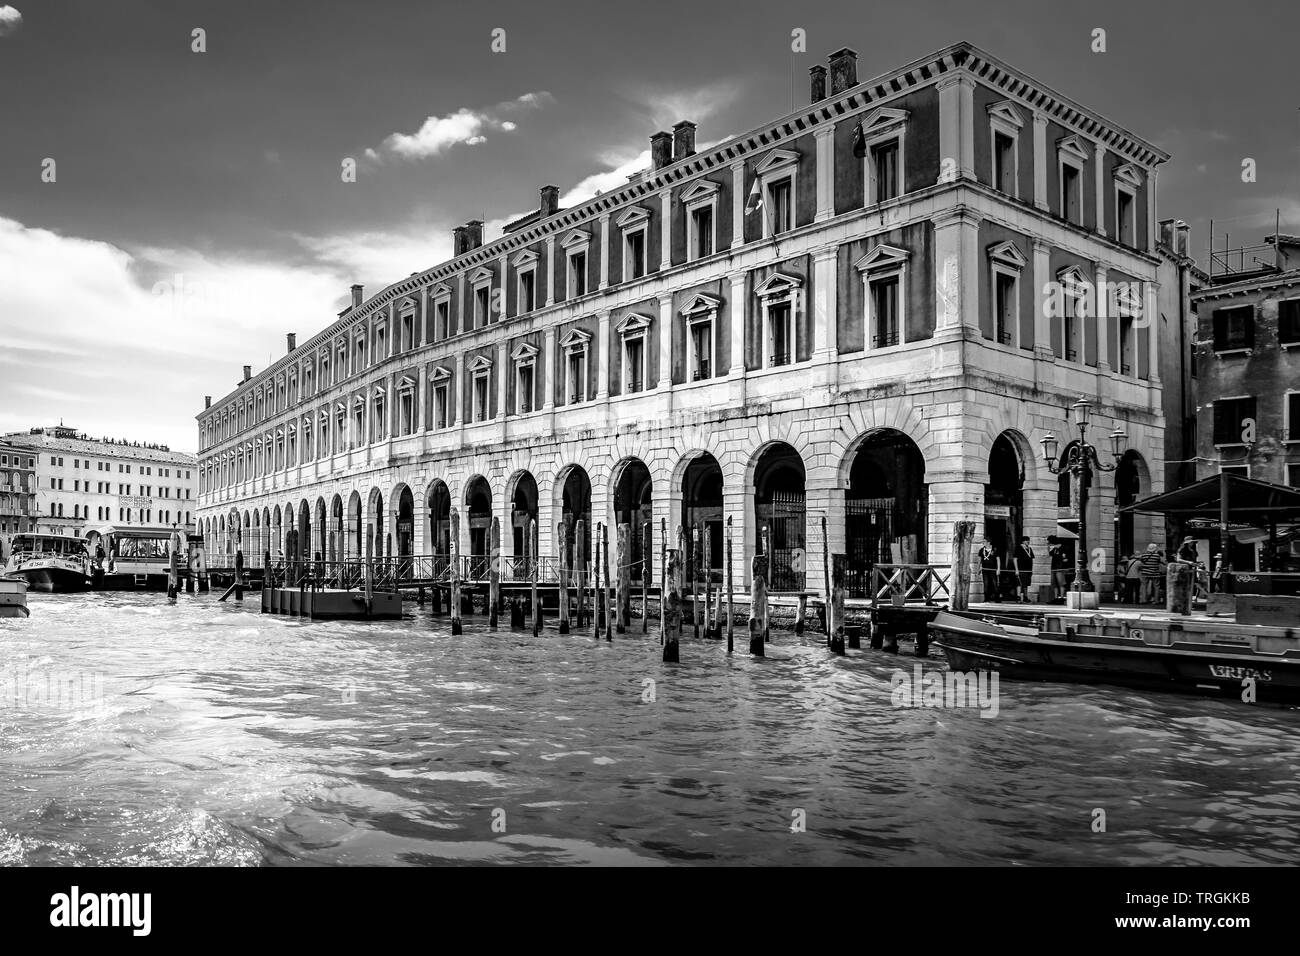 Palazzo camerlenghi Black and White Stock Photos & Images - Alamy